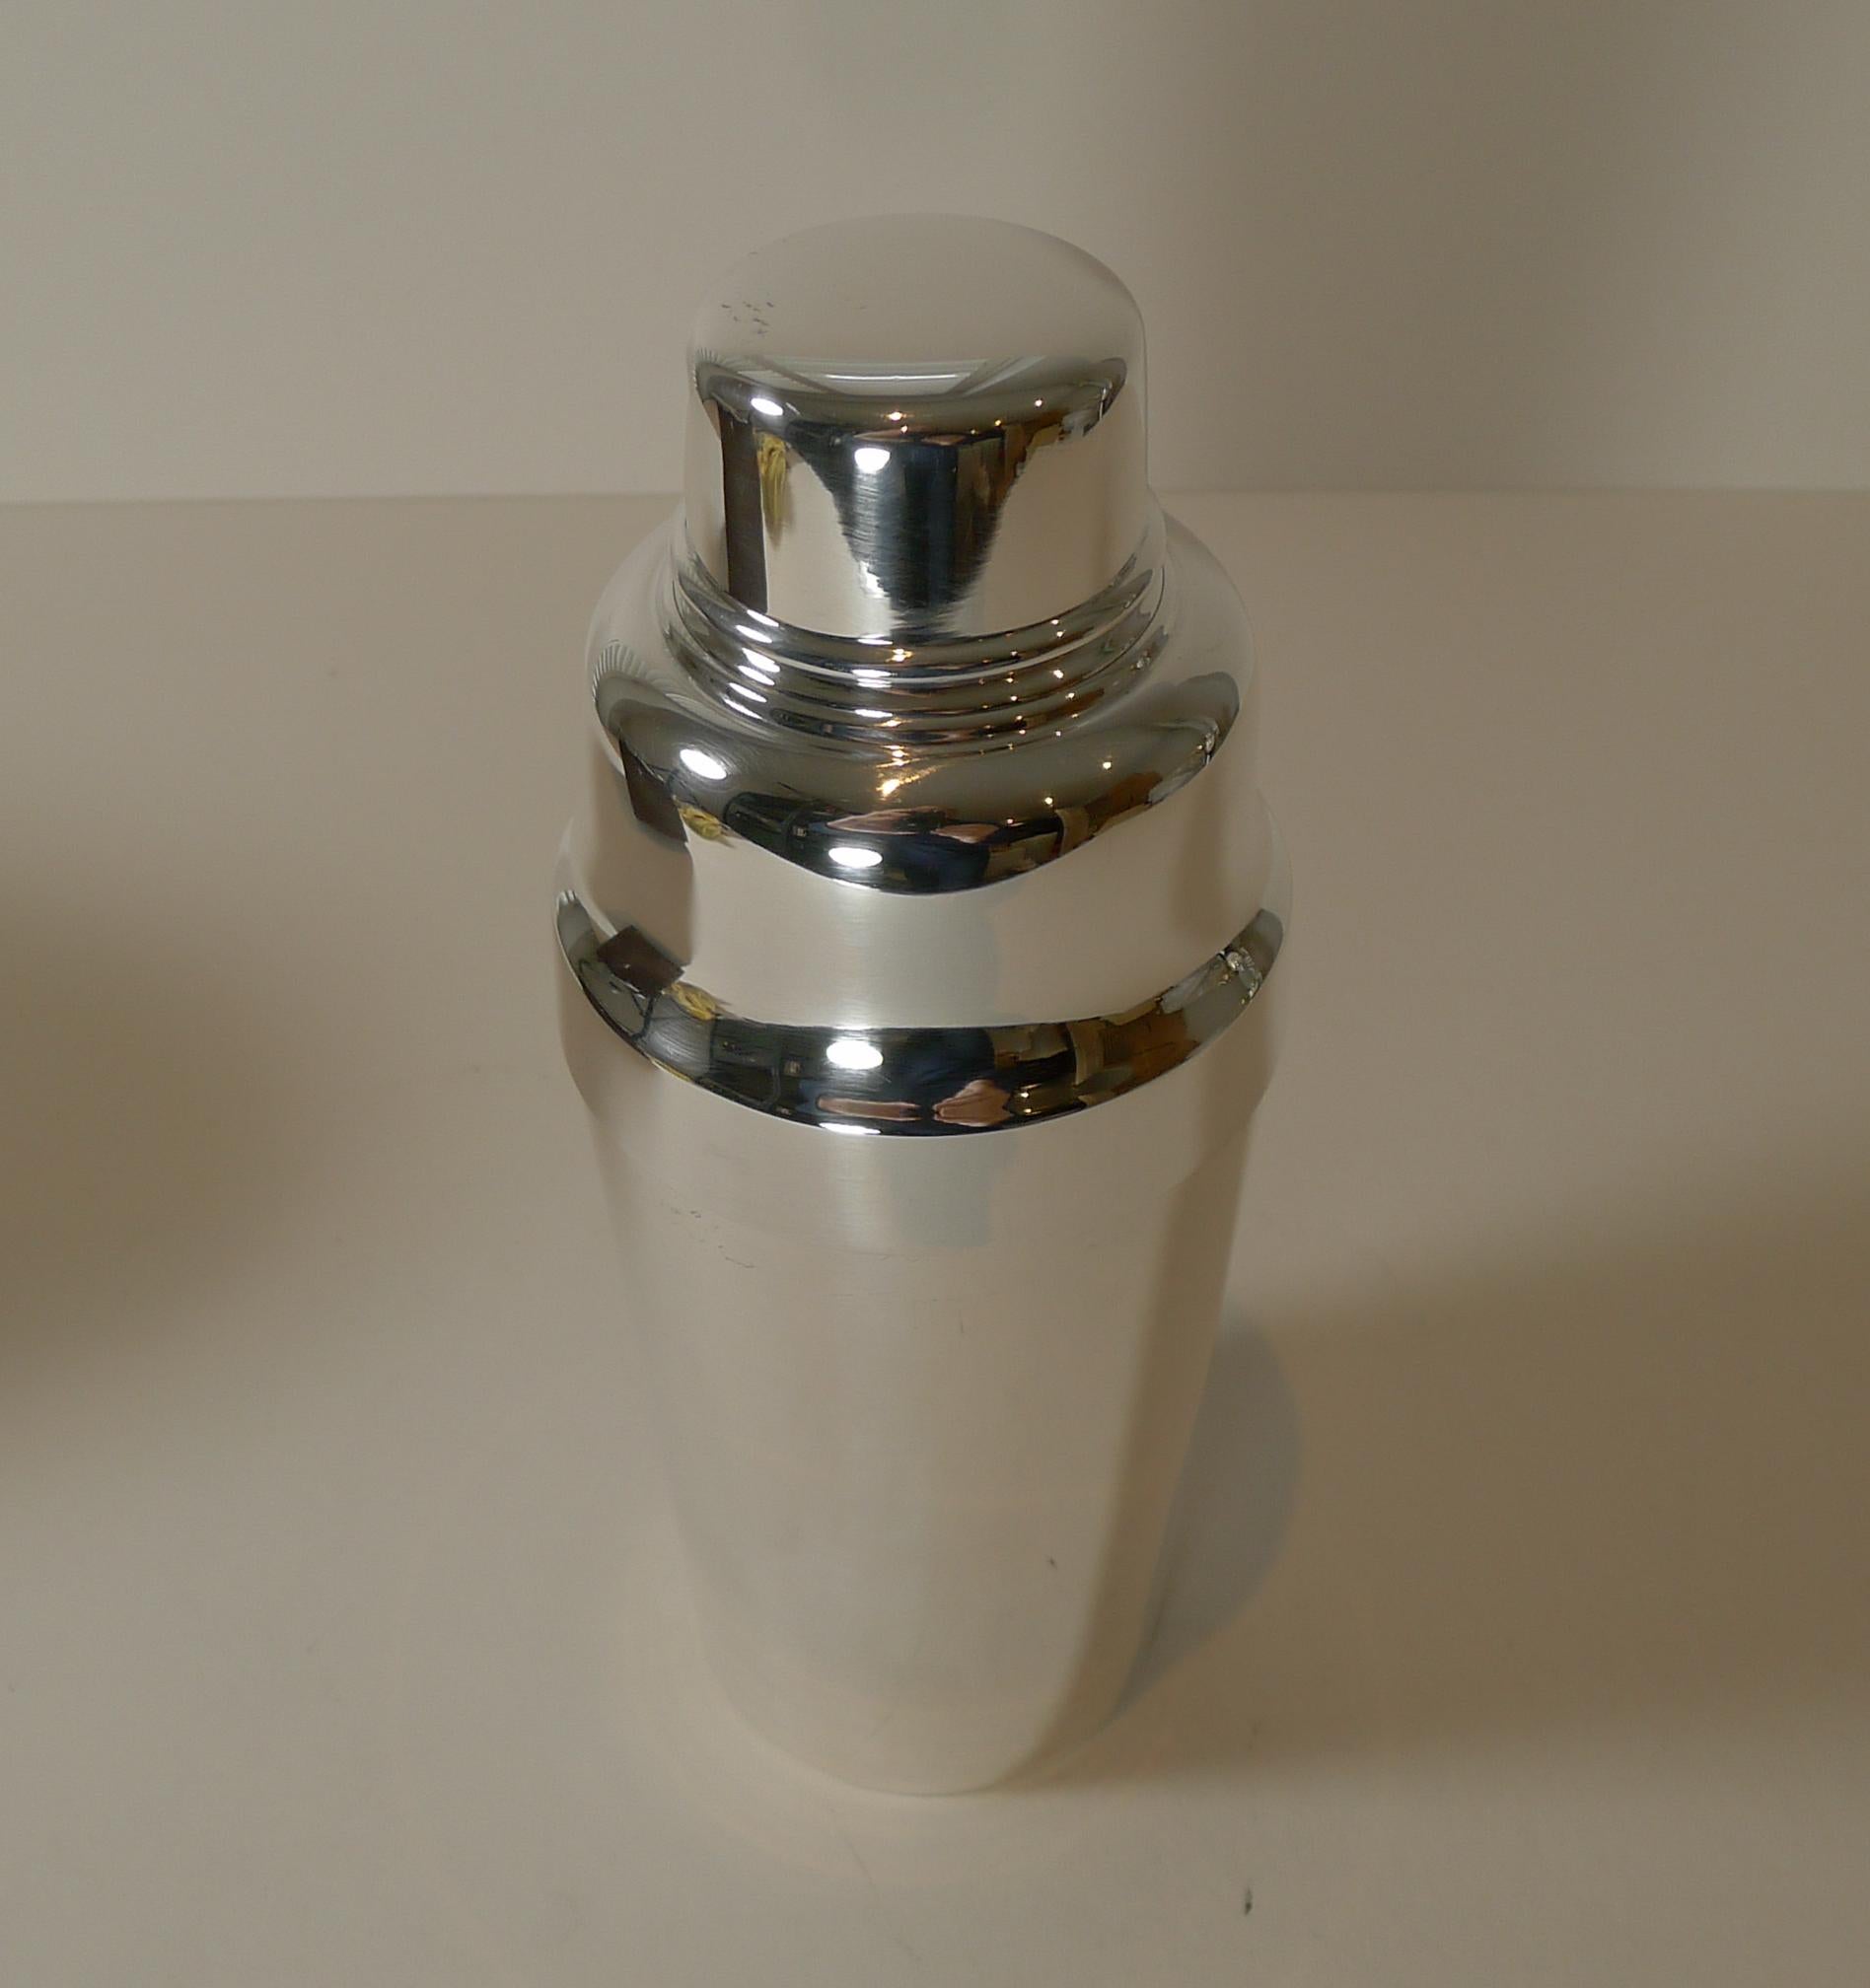 A superb French cocktail shaker just back from our silversmith's workshop having been professionally cleaned and polished returning it to it's former glory dating to c.1935.

Christofle is a goldsmith and tableware company, founded in Paris in